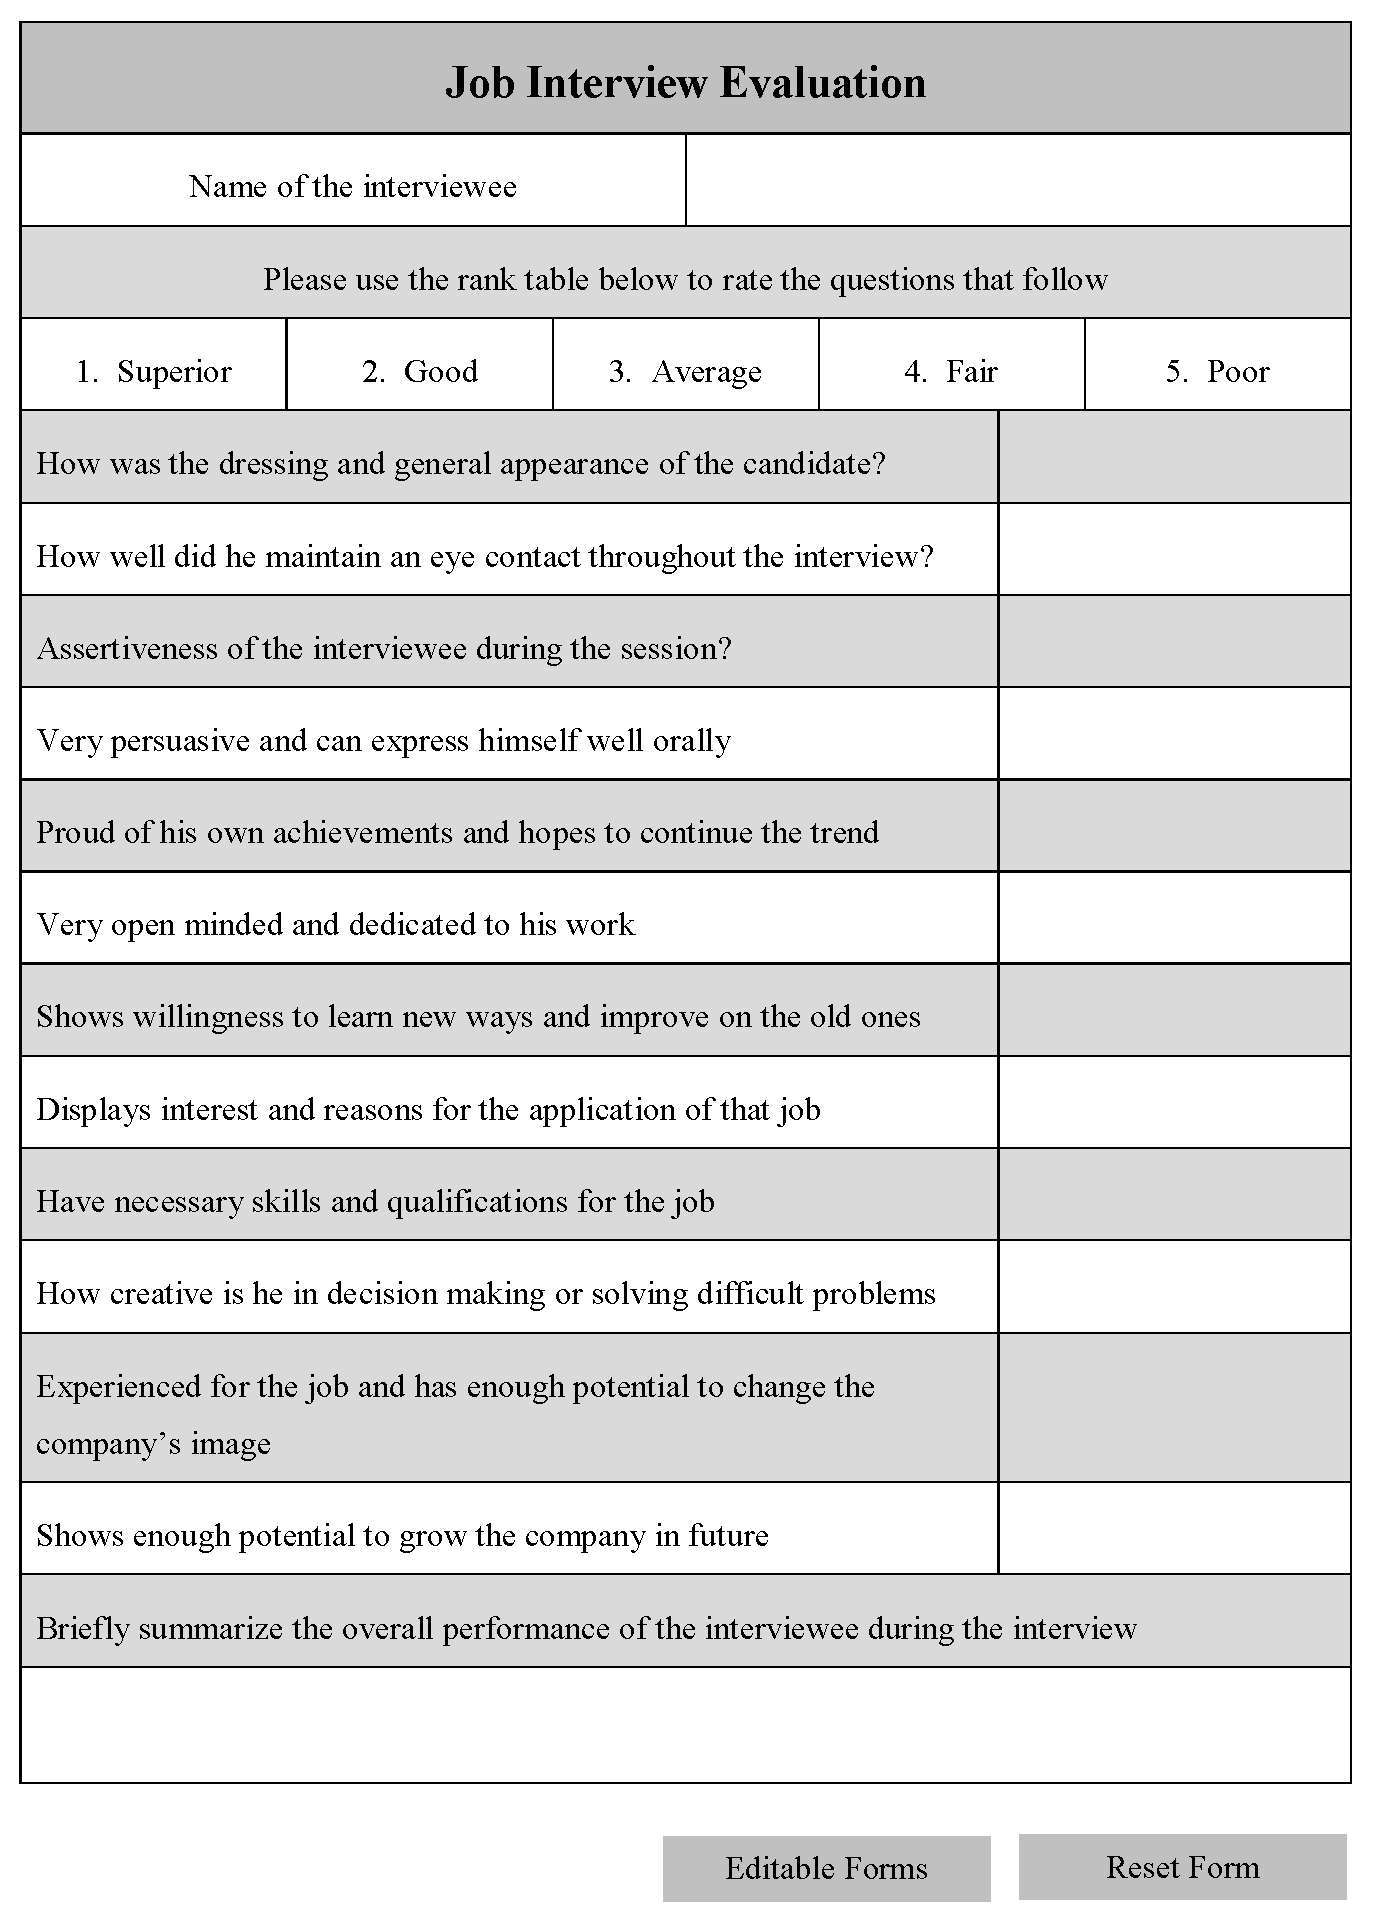 how to write an interview evaluation report